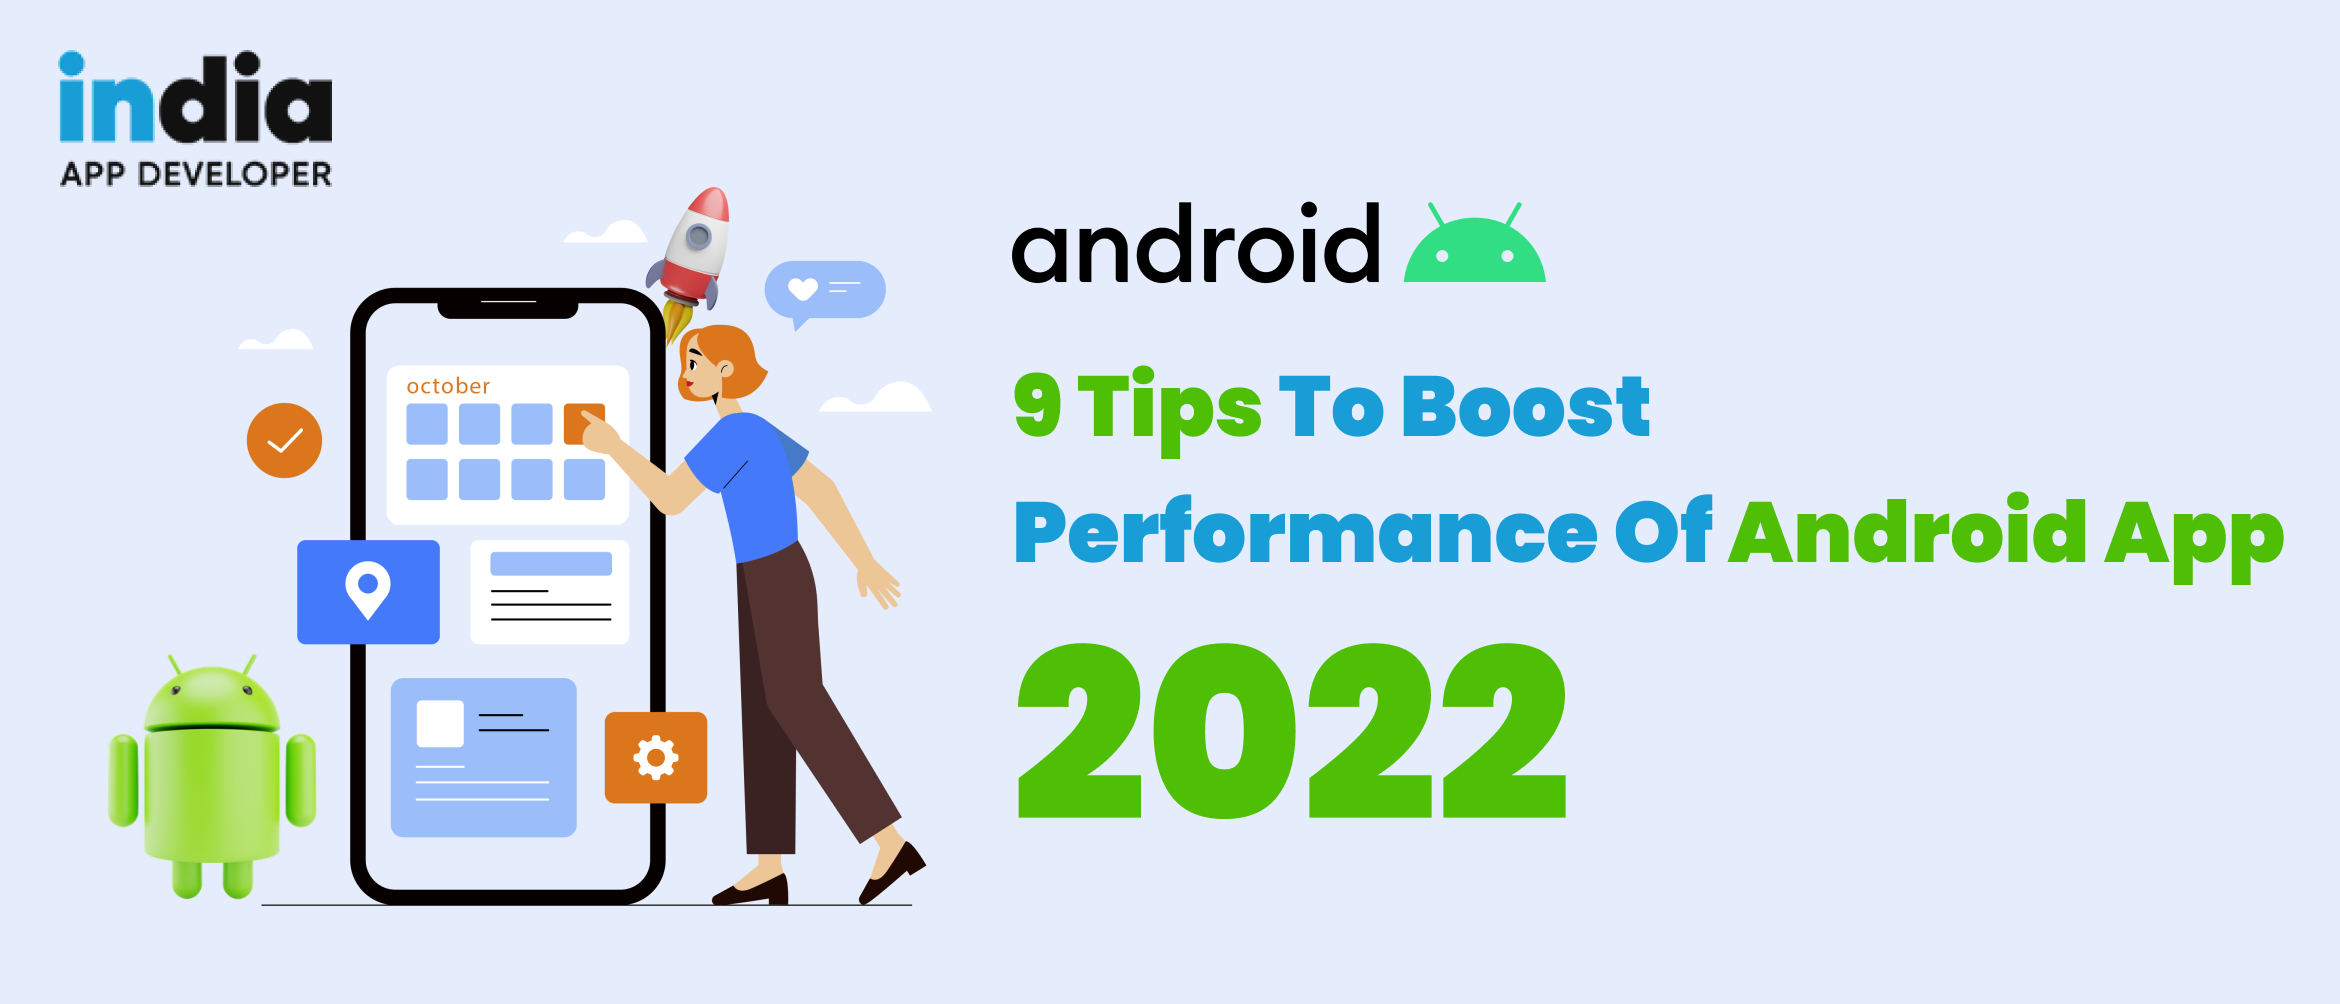 9 Tips to Boost Performance of android App - 2022